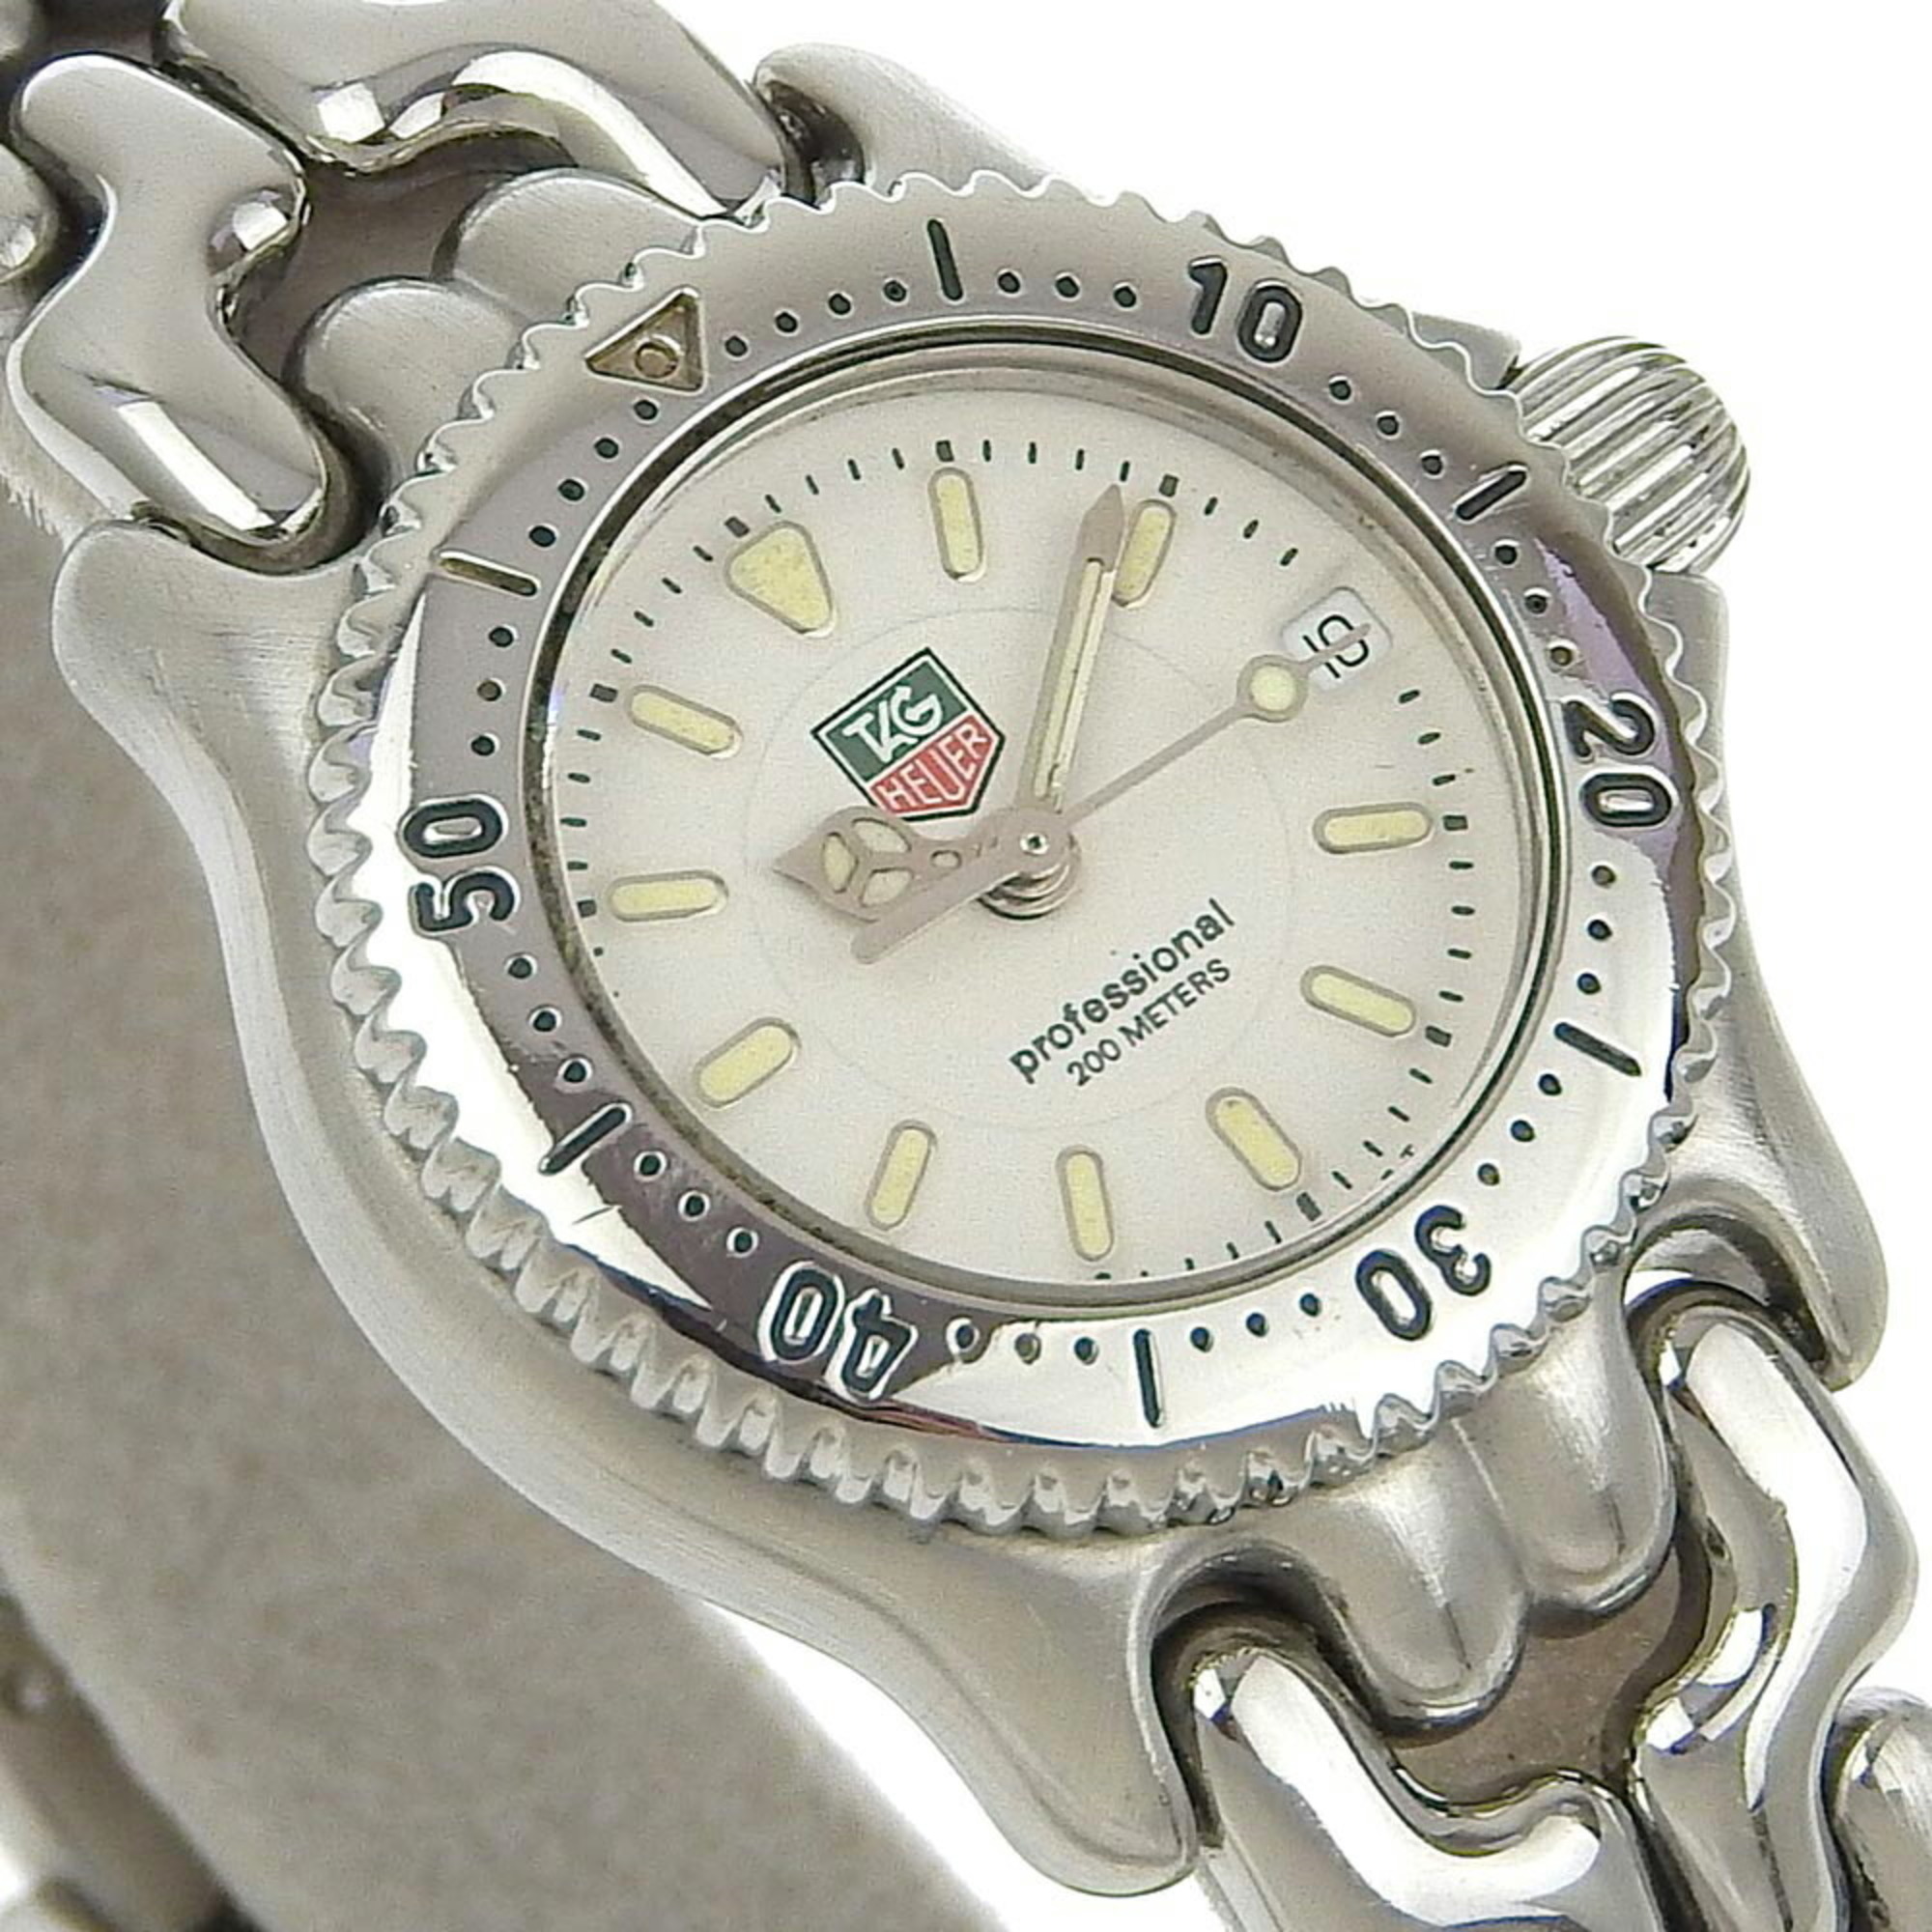 TAG HEUER Cell Watch WG1412 Stainless Steel Silver Quartz Analog Display White Dial Ladies